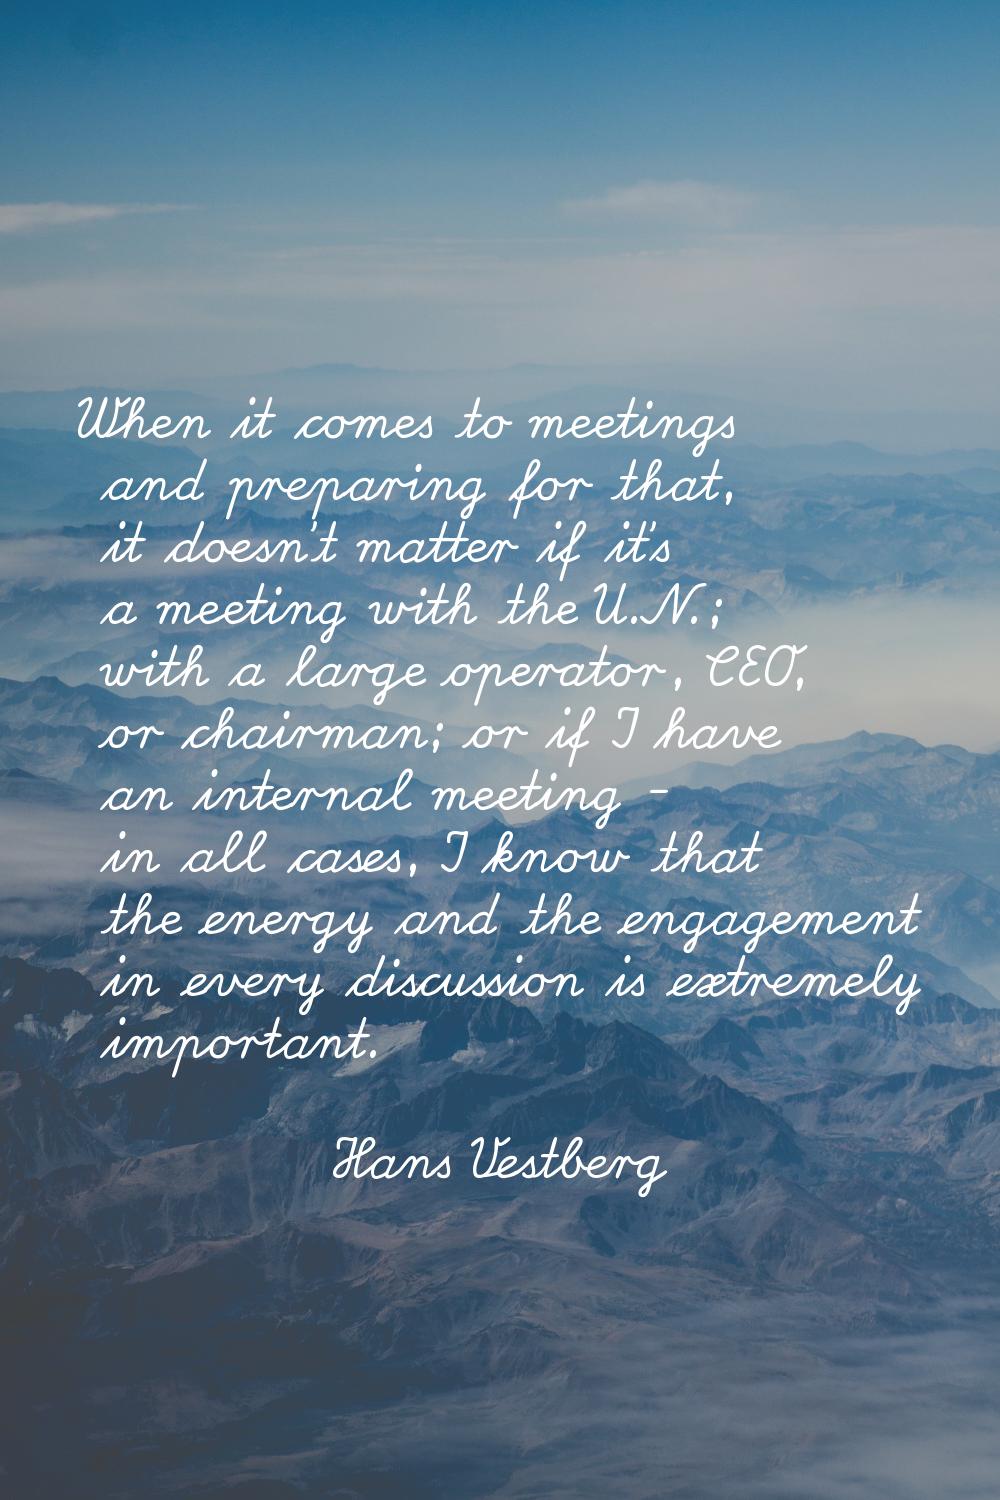 When it comes to meetings and preparing for that, it doesn't matter if it's a meeting with the U.N.